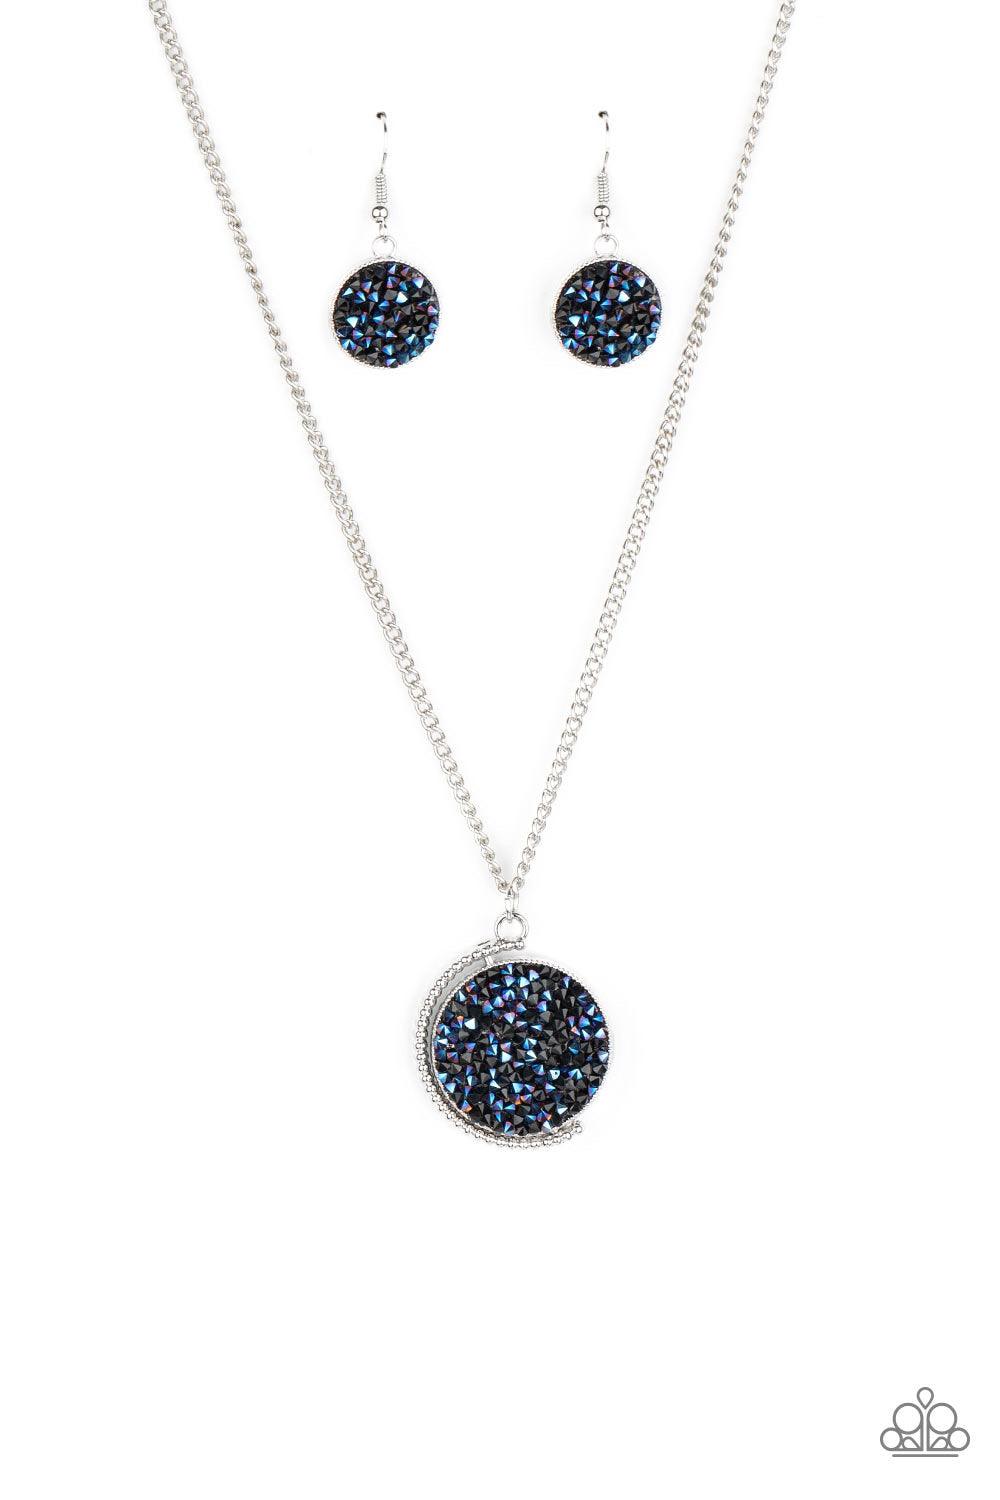 Paparazzi Accessories My Moon And Stars - Blue A smoldering collision of black and metallic blue rhinestones are encrusted across the front and back of a textured silver disc below the collar. Threaded along a dainty rod, the glittery pendant effortlessly